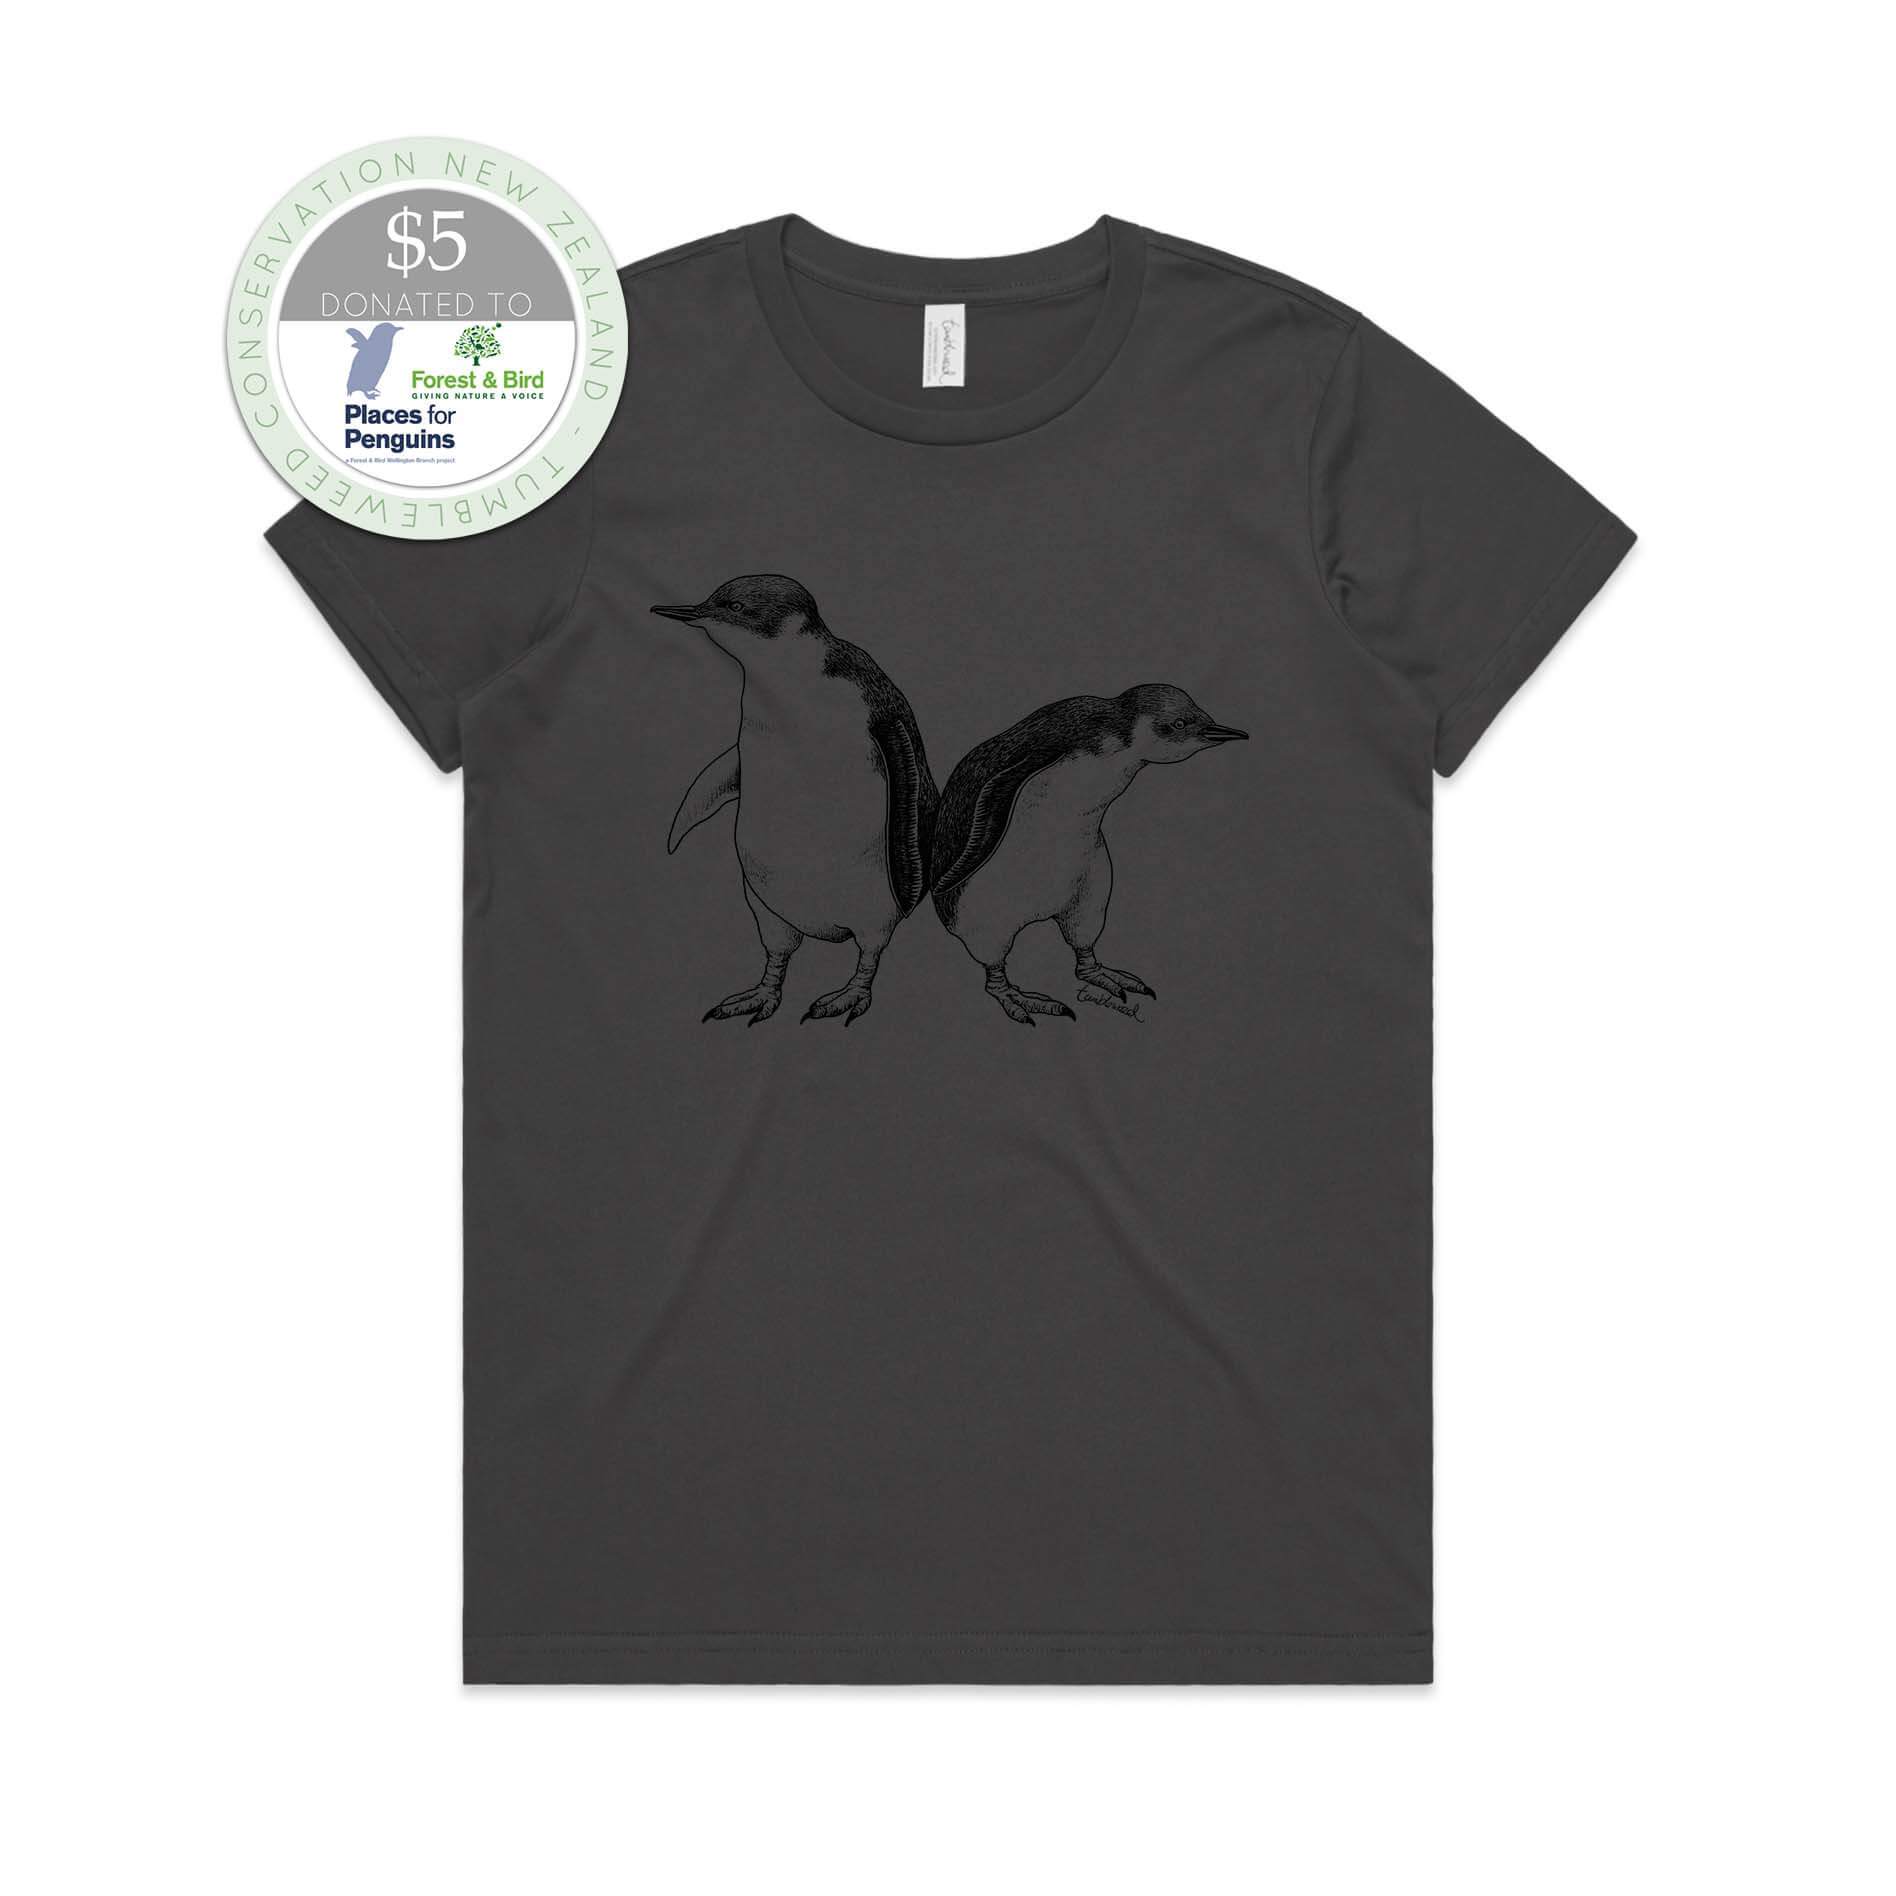 Charcoal, female t-shirt featuring a screen printed Little Blue Penguin design.